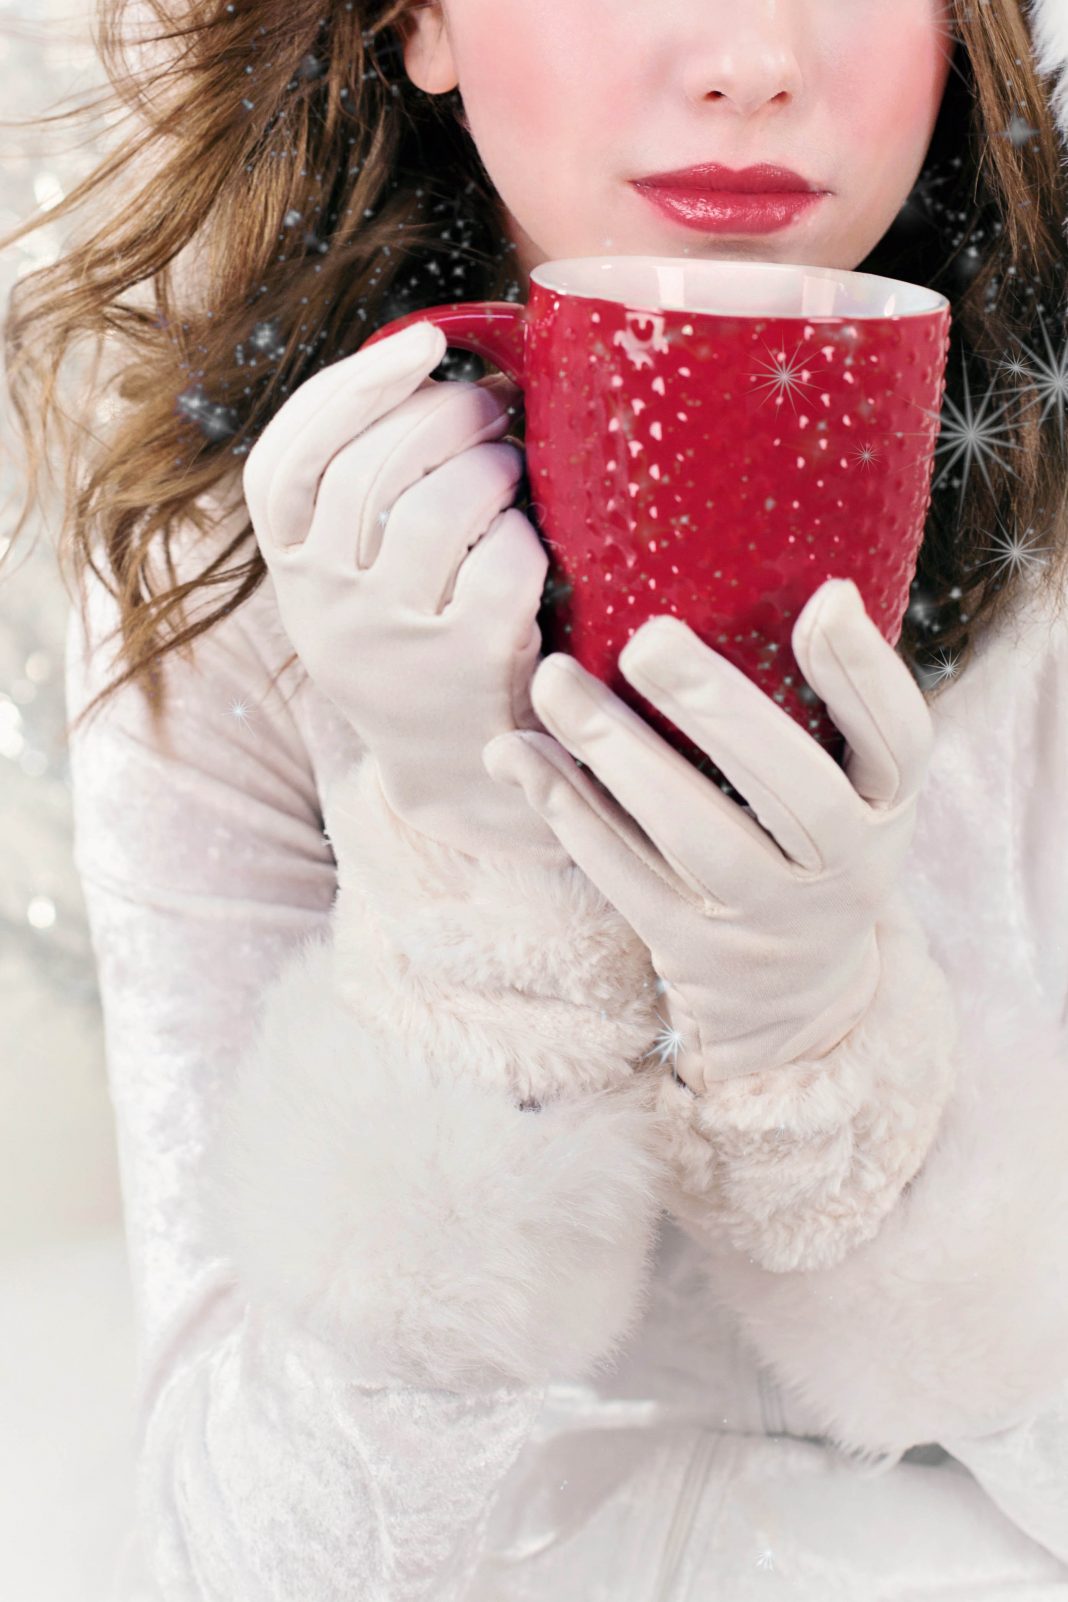 Lady in white with red mug